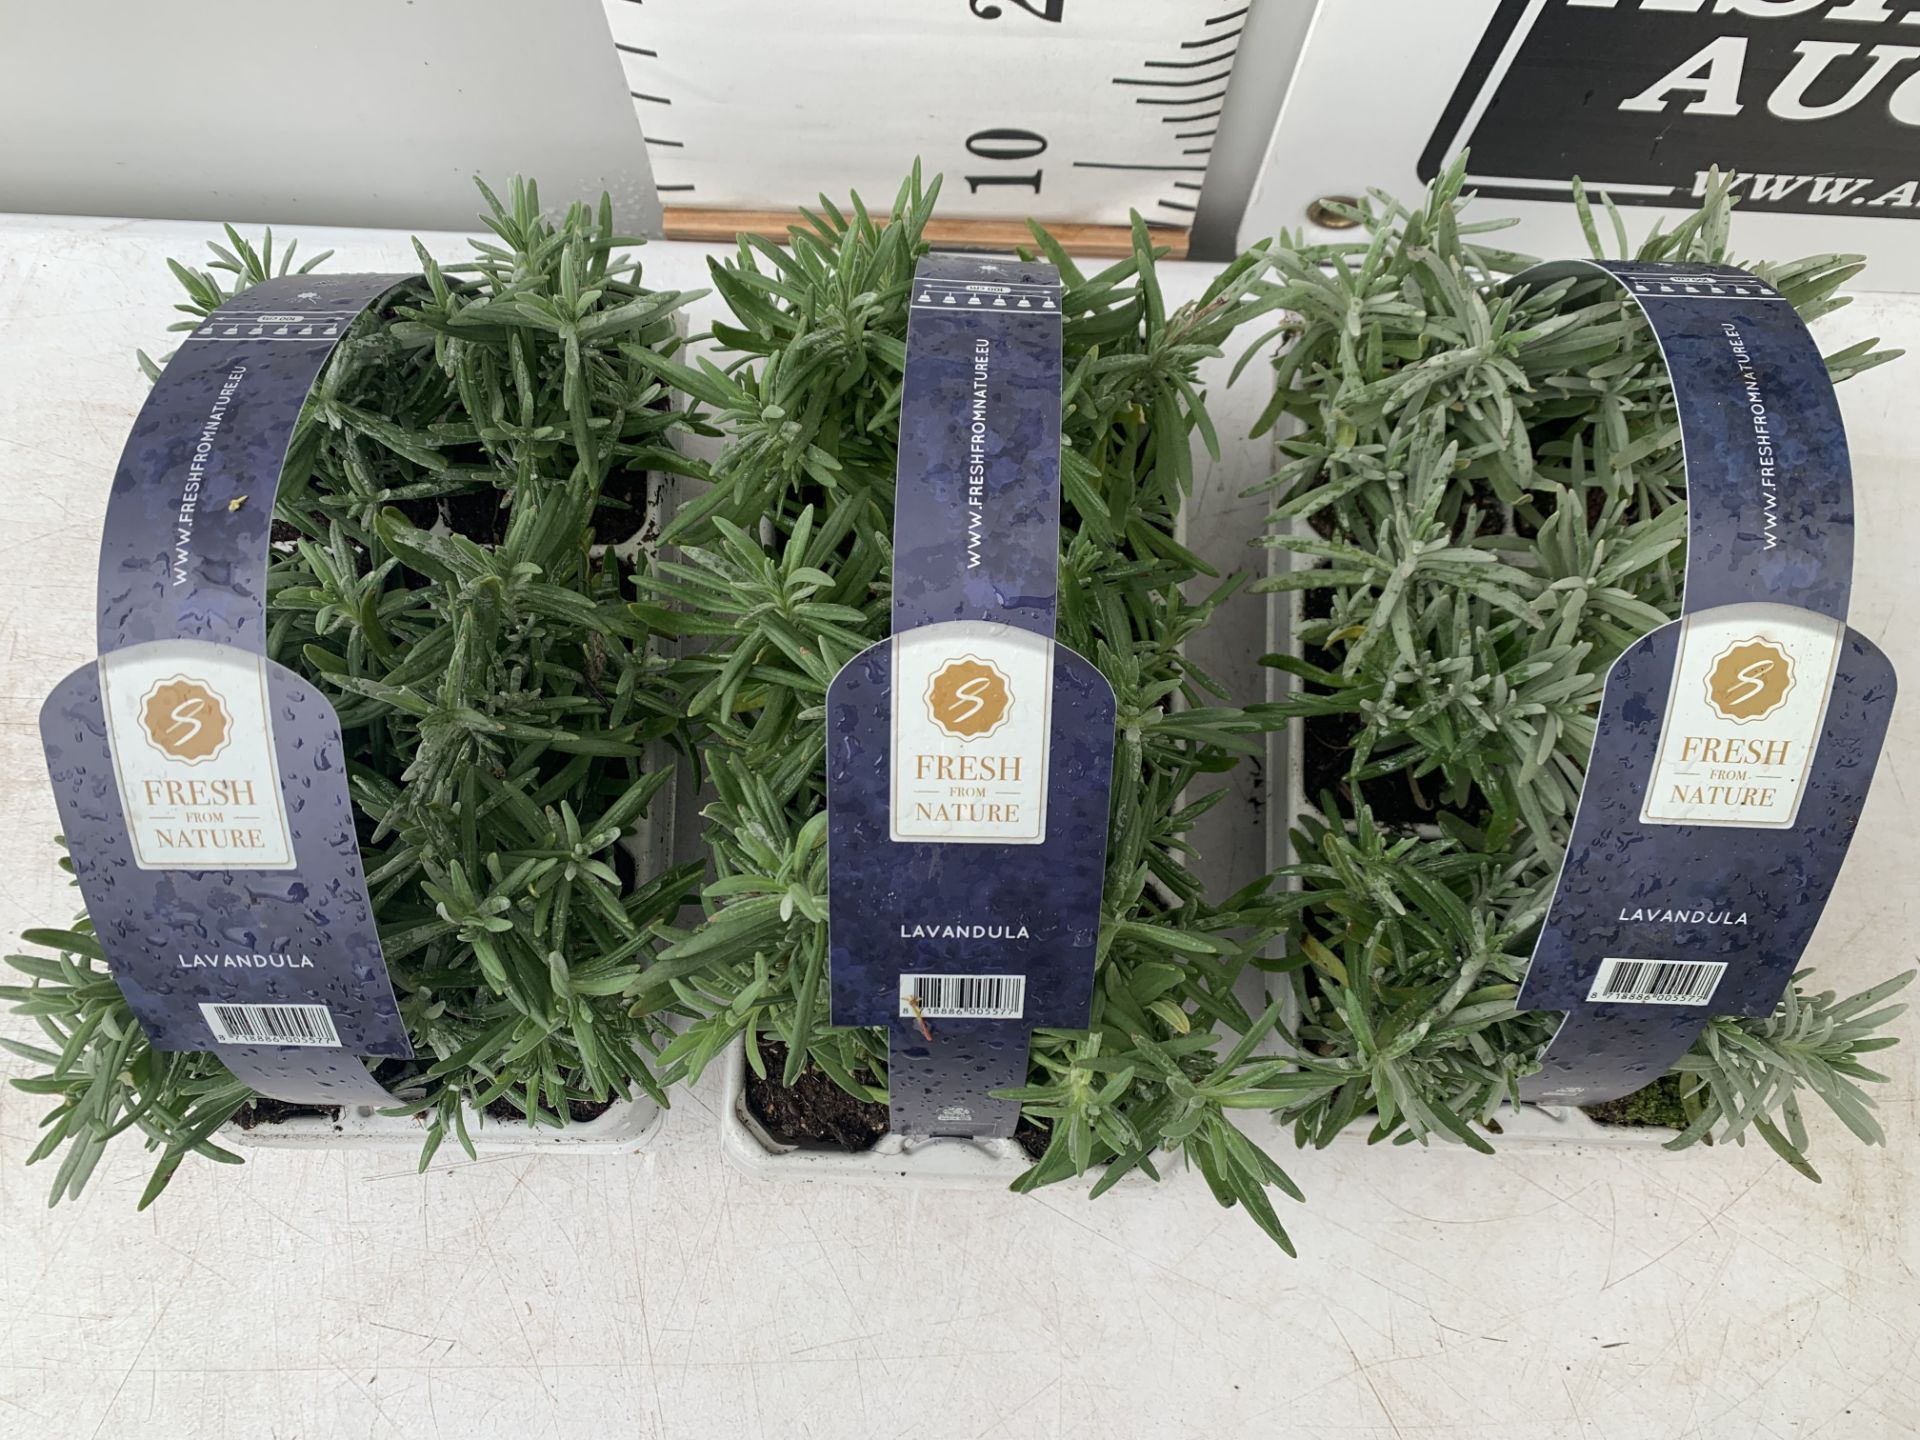 3 CARRY TRAYS OF PLUG LAVENDERS 18 PLANTS IN TOTAL PLUS VAT TO BE SOLD FOR THE THREE TRAYS - Image 3 of 6